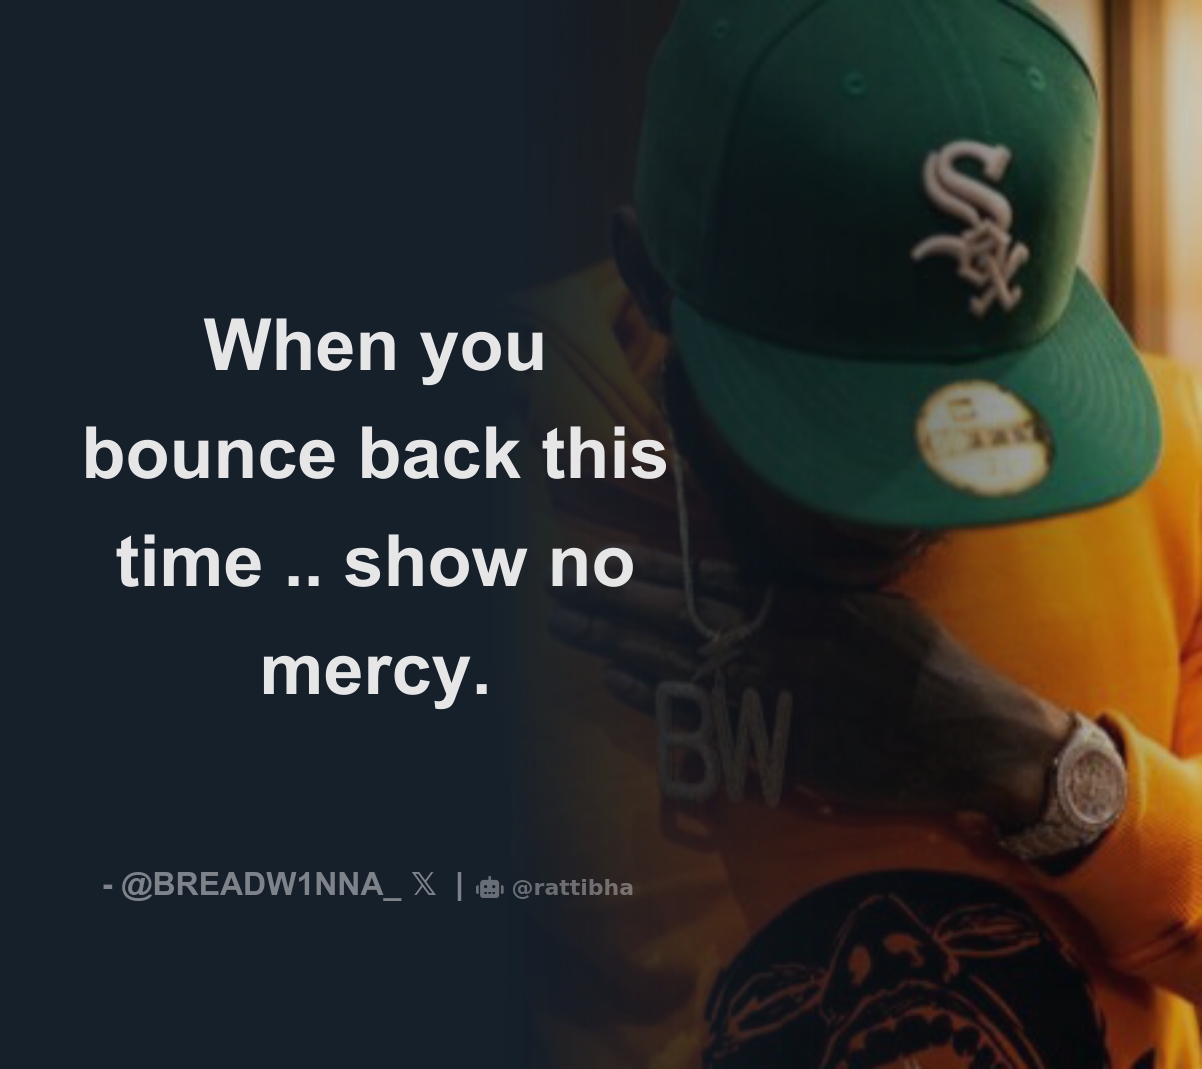 When You Bounce Back This Time Show No Mercy Download Tweet Image From ʜᴀᴜɴ Breadw1nna 